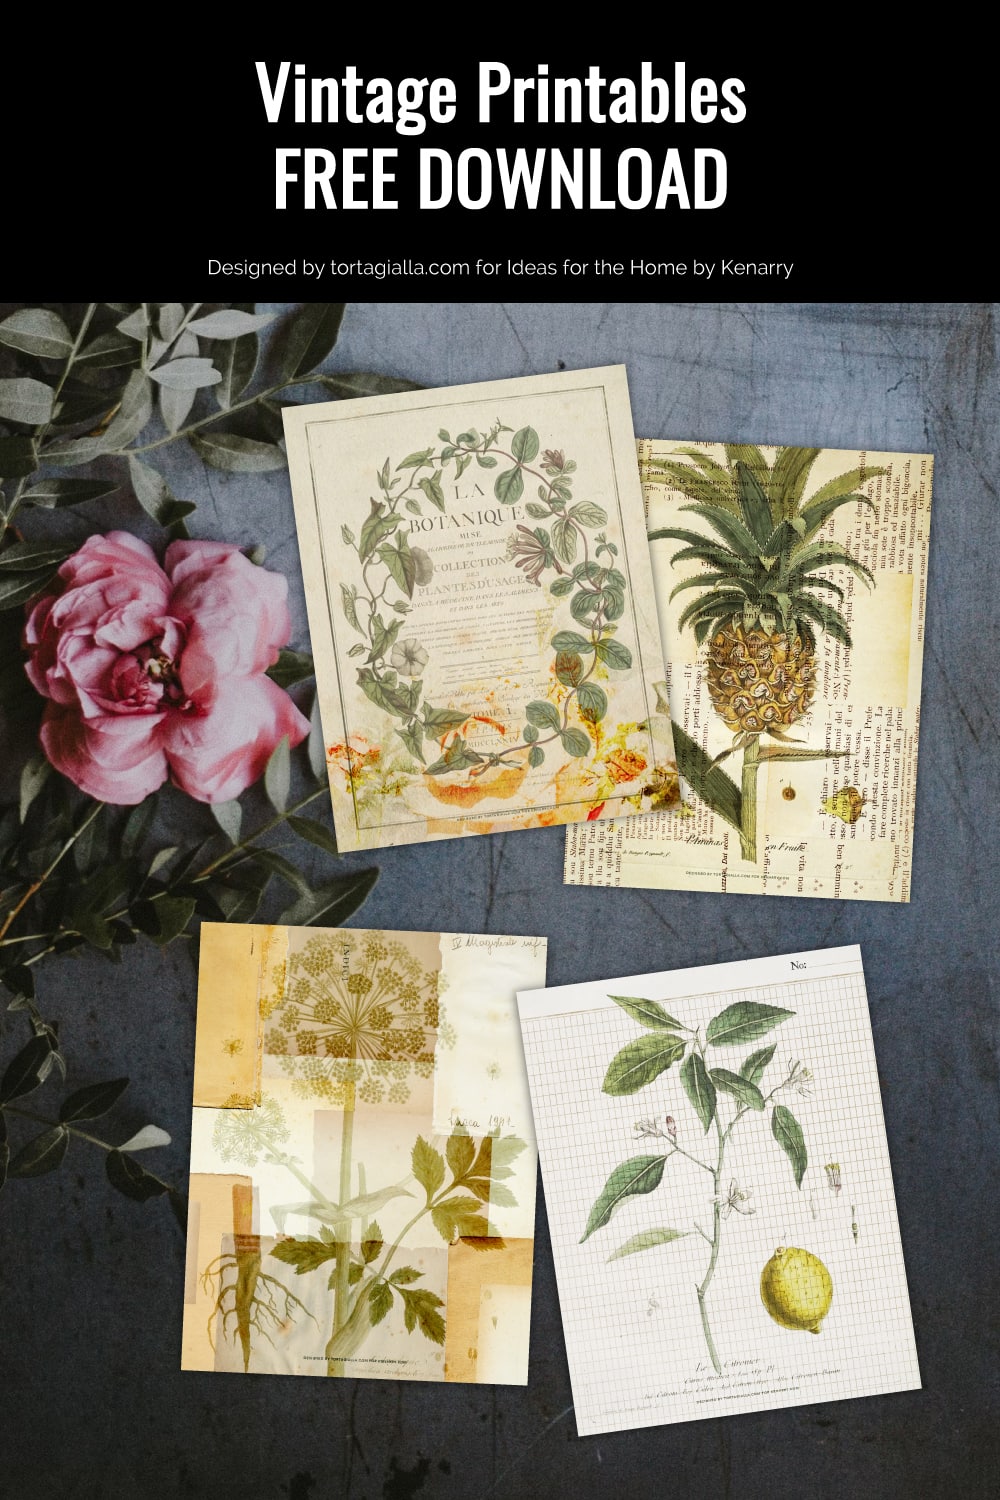 Preview of four vintage paper and botanical style art prints on dark slate background with pink flower and foilage on the left.